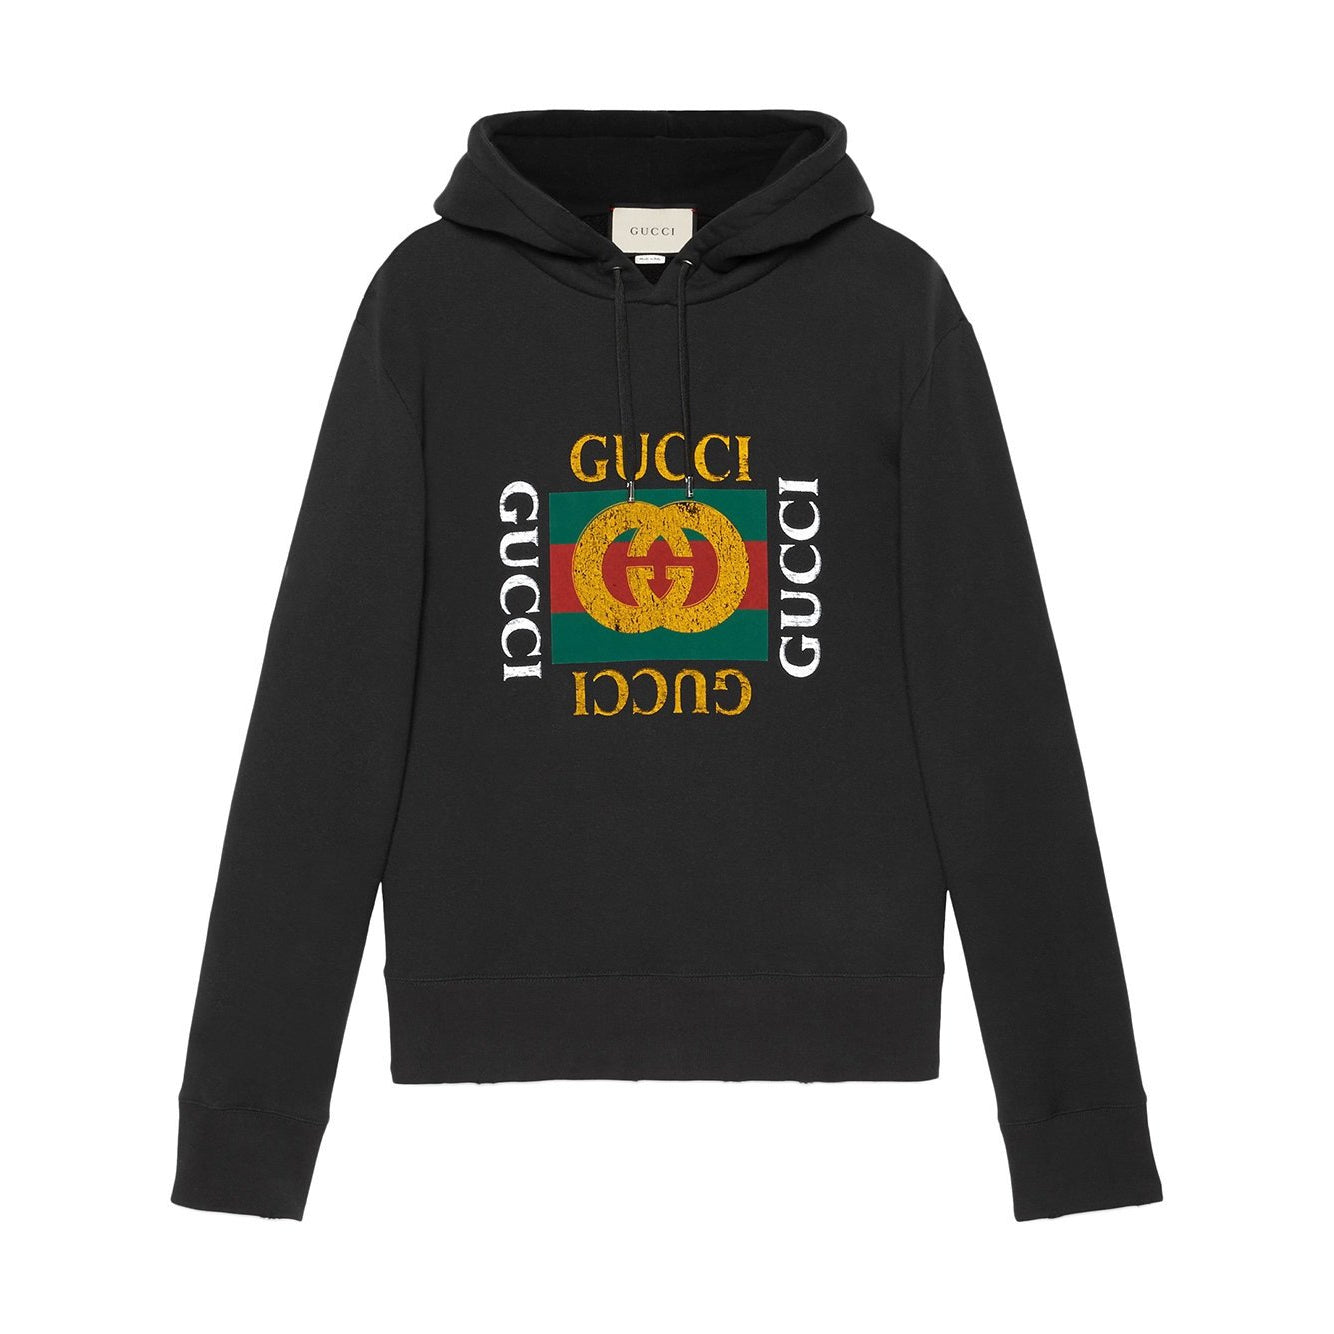 Gucci hoodie “logo” - Centrall Online